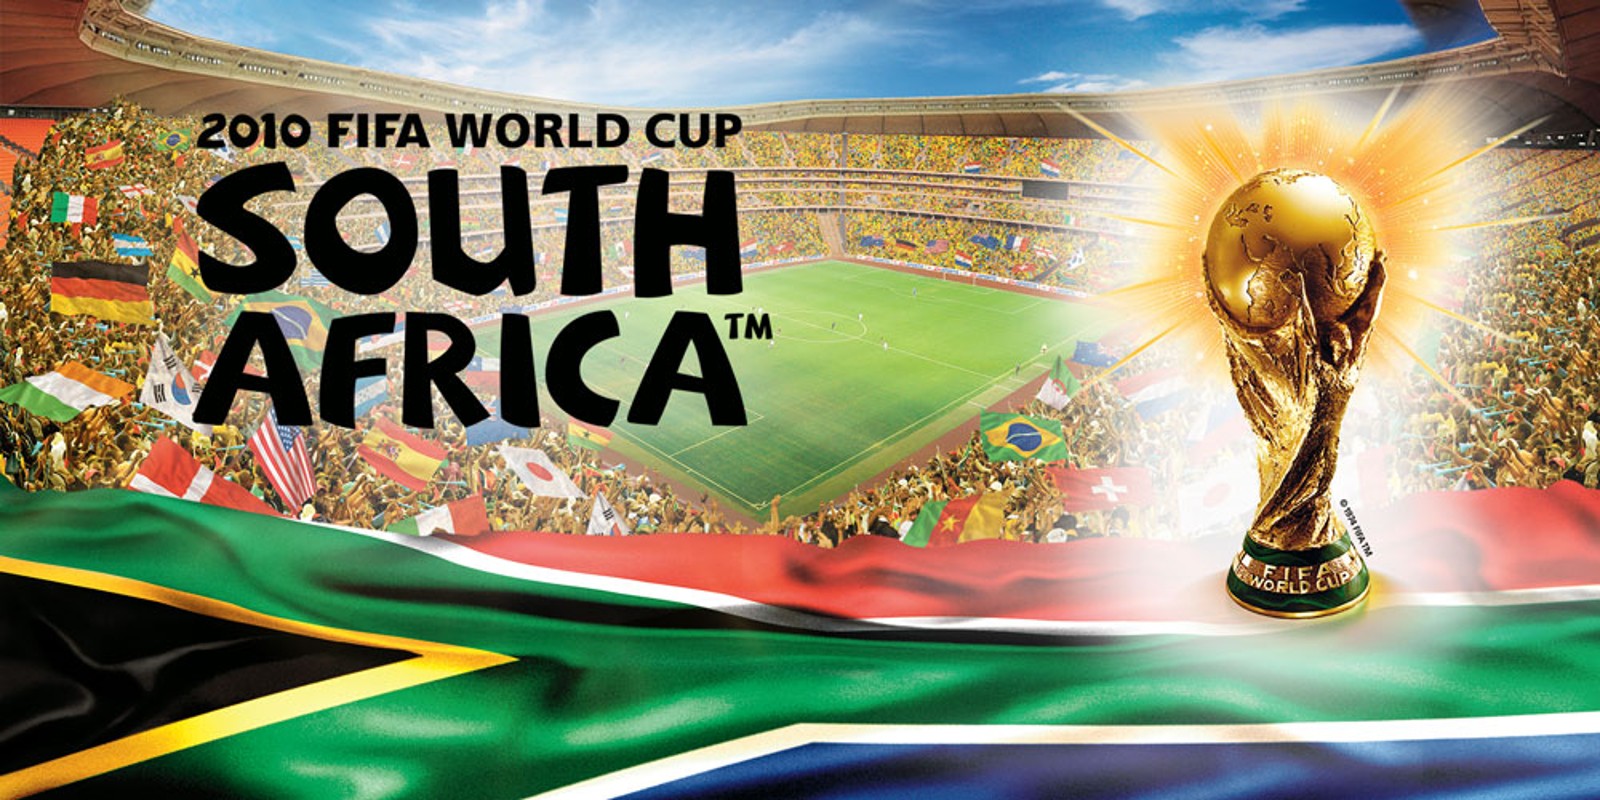 2010-fifa-world-cup-south-africa-banner